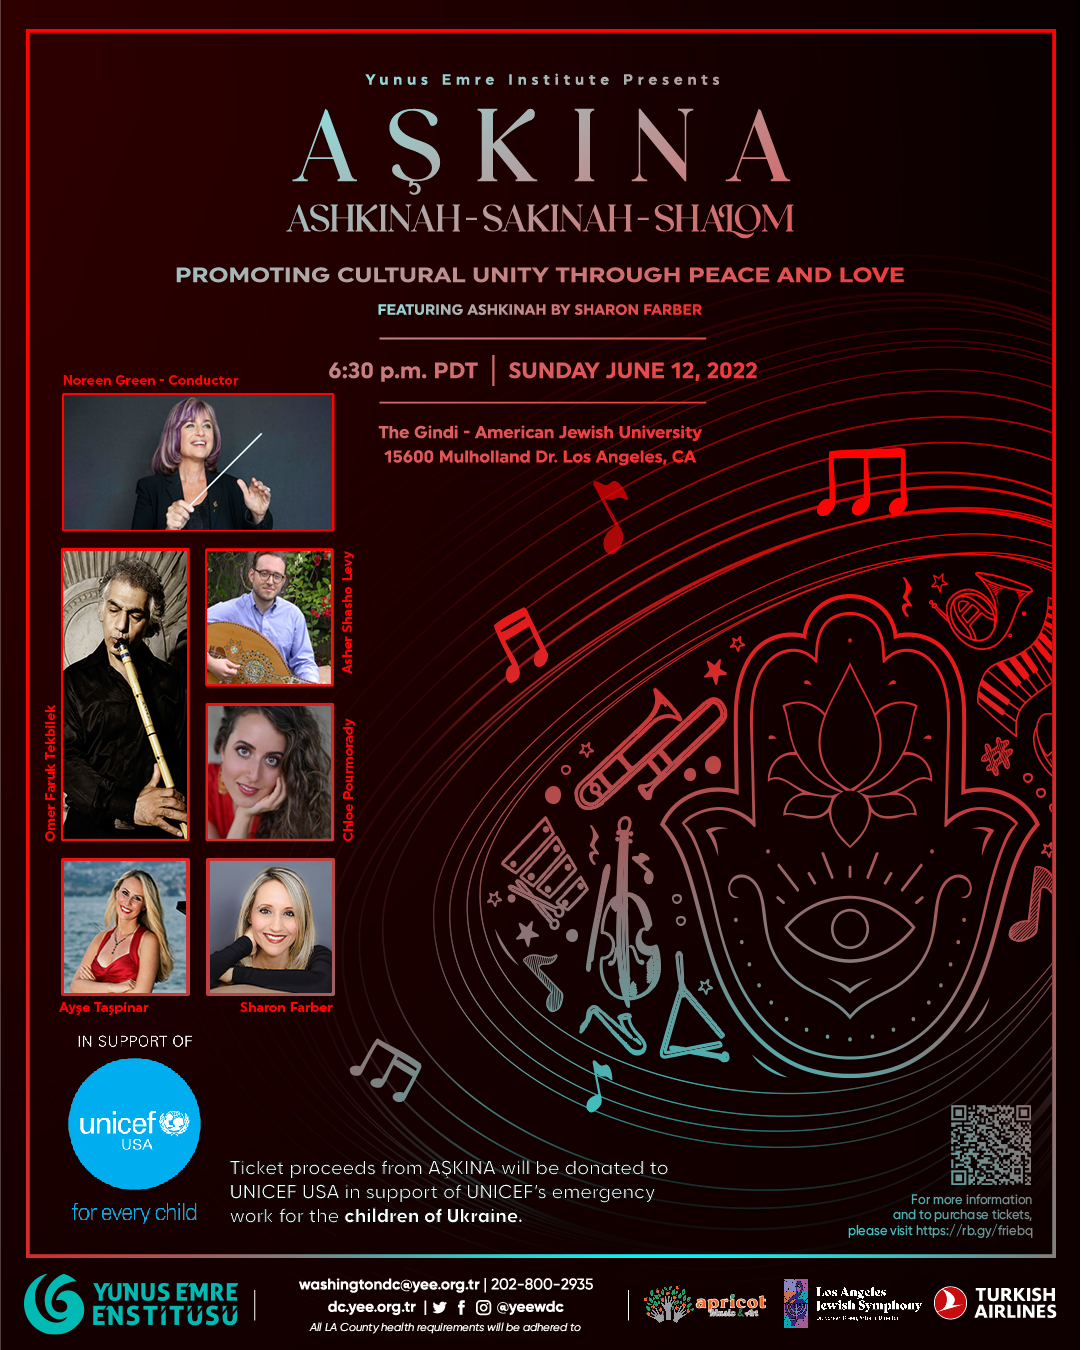 A flyer for the June 12 concert Askina